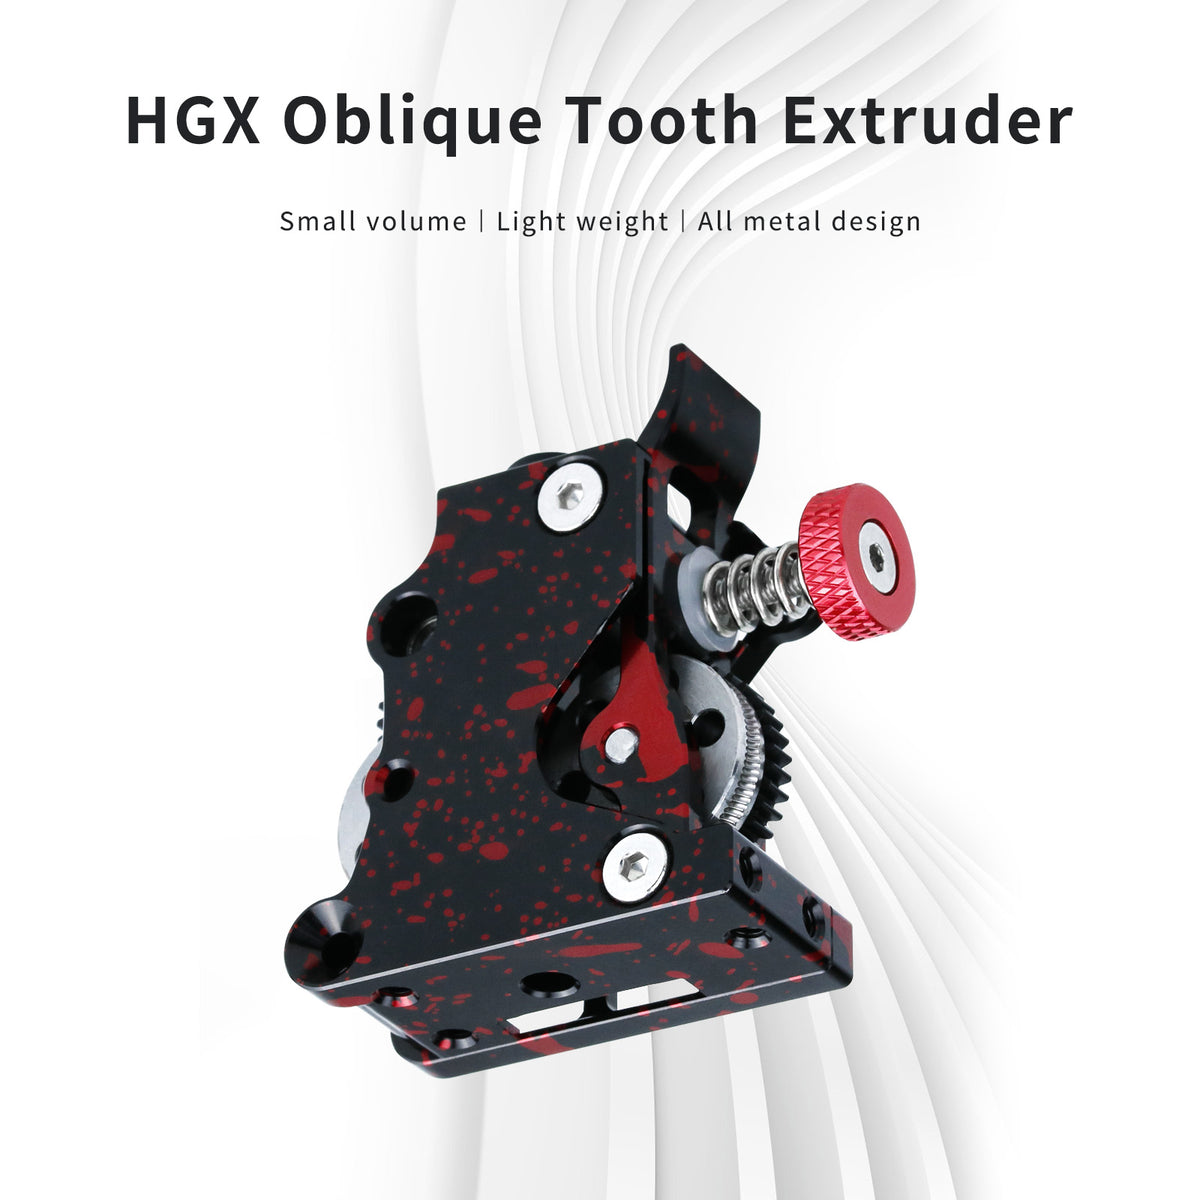 HGX Large Gear Helical Tooth Extruder